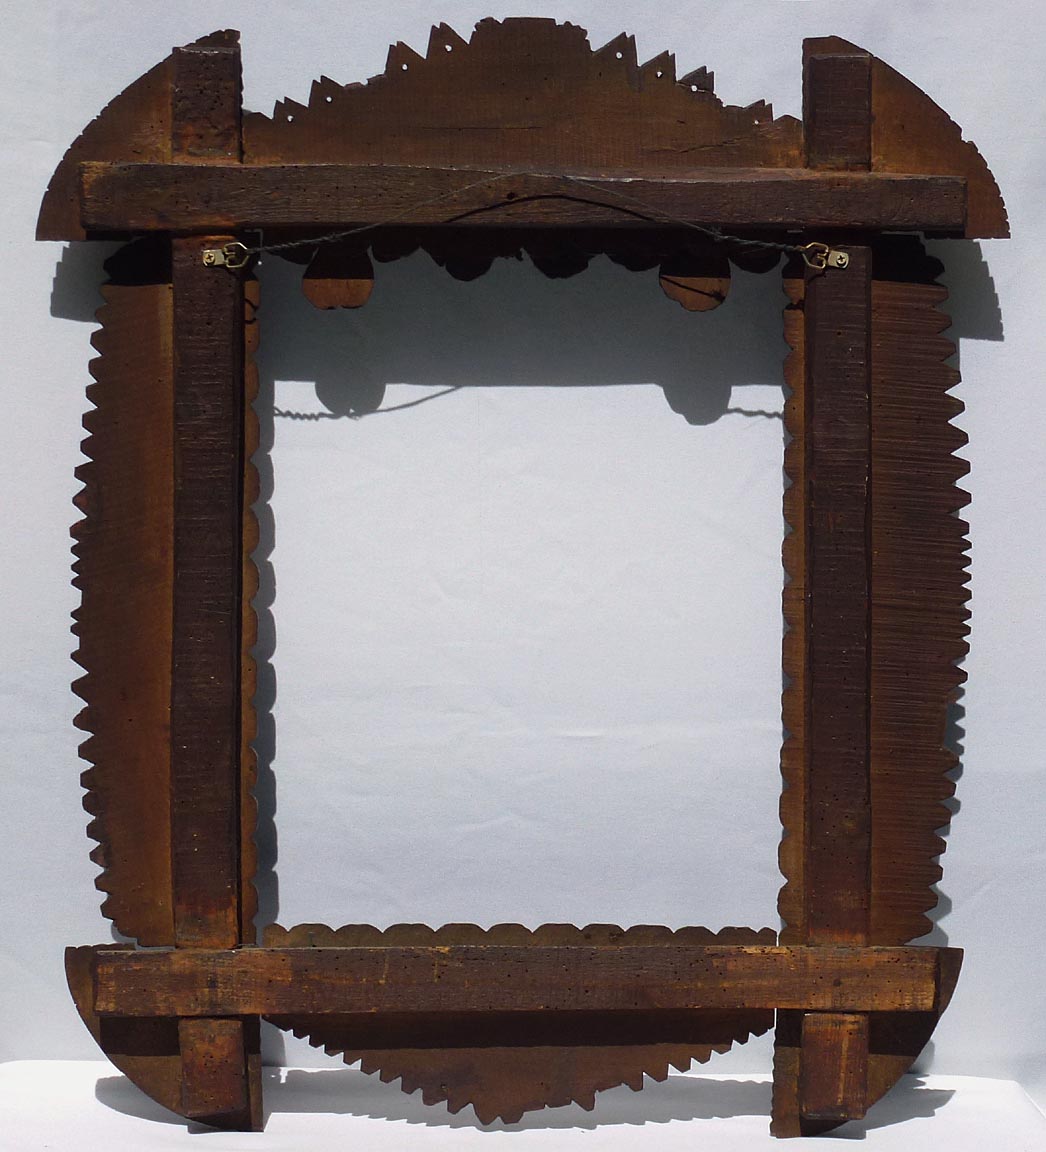 Large tramp art frame with hearts, carved fruit